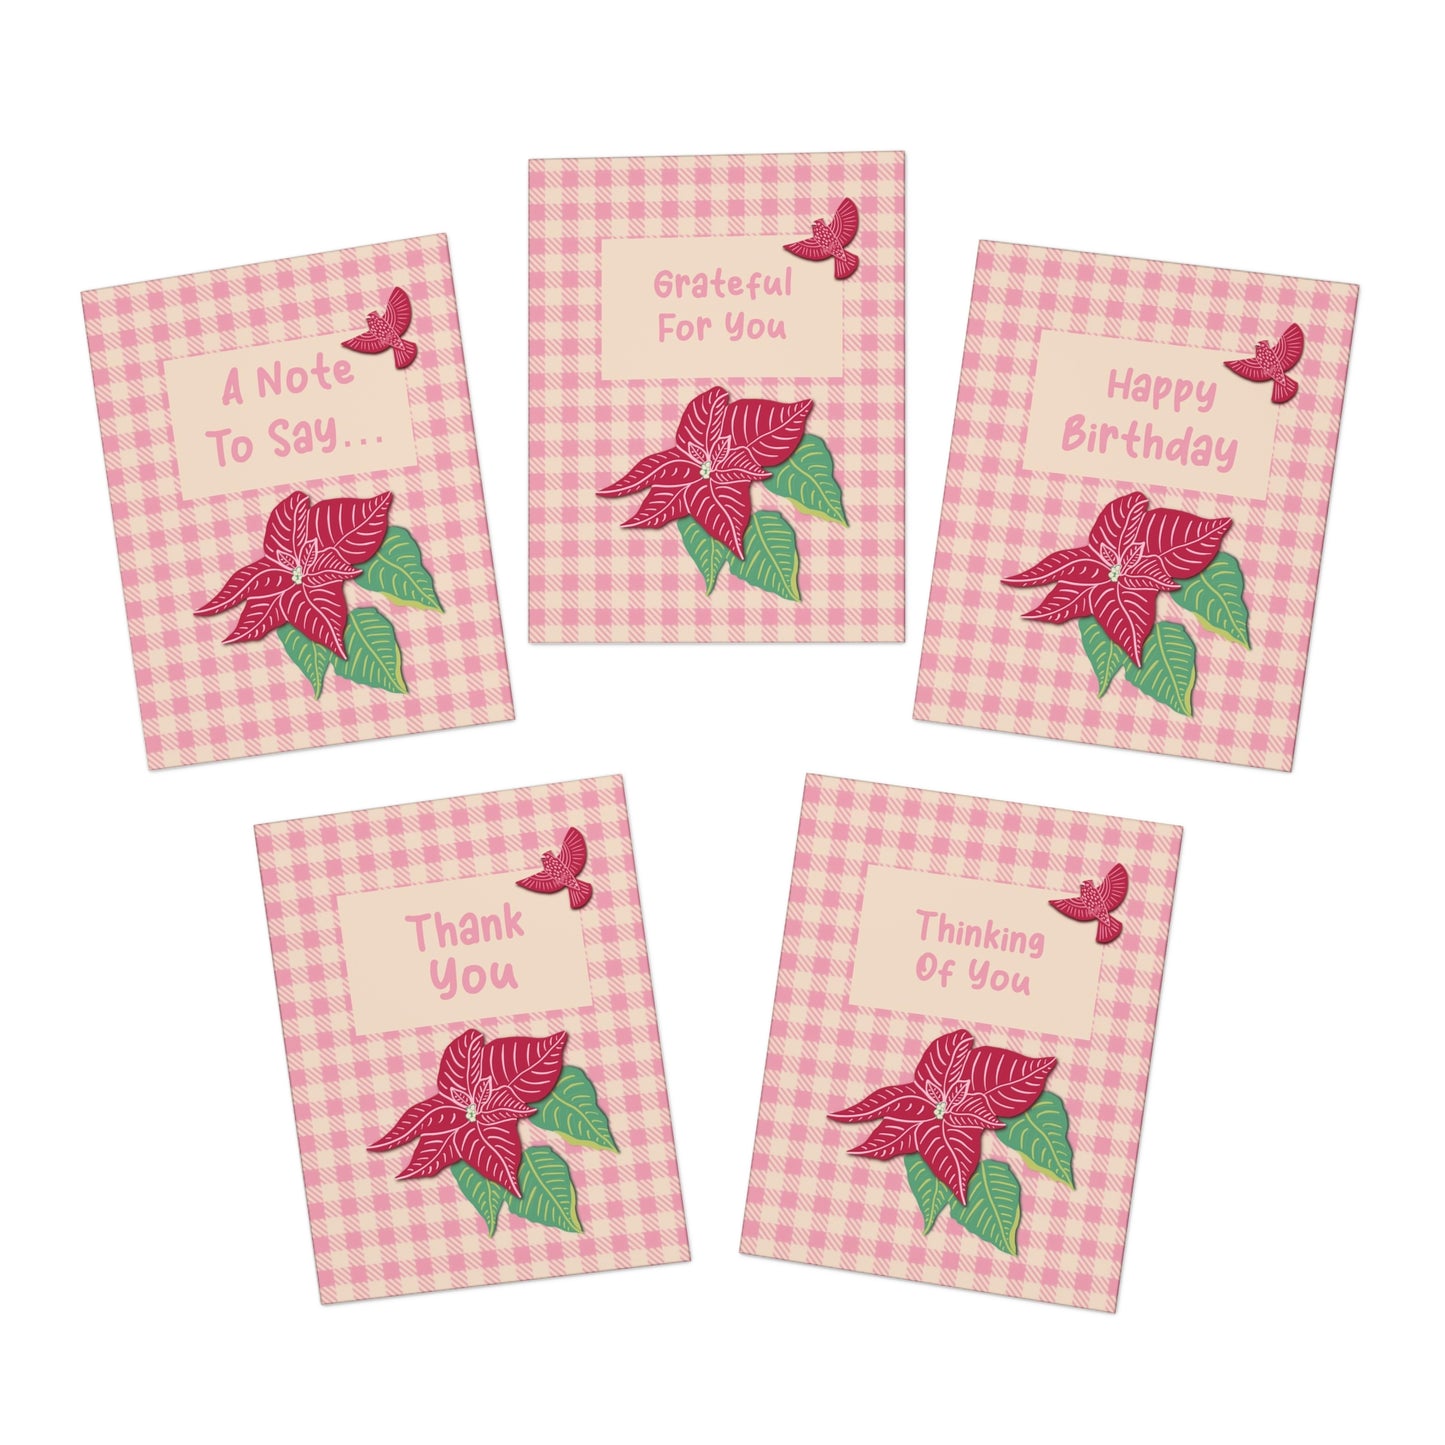 Pink Poinsettia on Pink Plaid Multi-Occasion Multi-Design Greeting Cards (5-Pack) - FREE SHIPPING